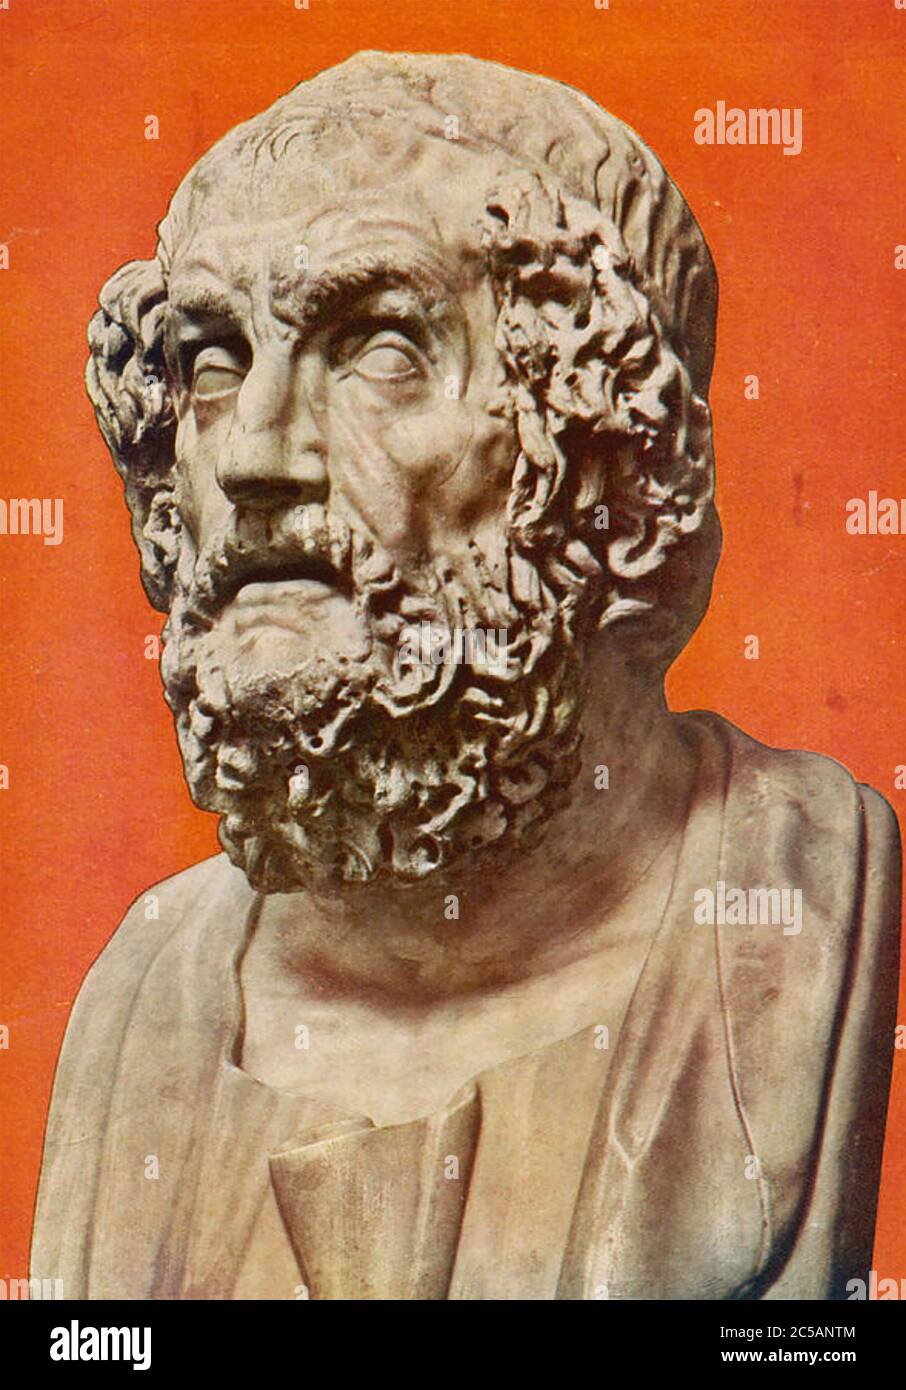 HOMER Ancient Greek author of the Iliad and the Odyssey. A Roman bust from the second century AD. Stock Photo